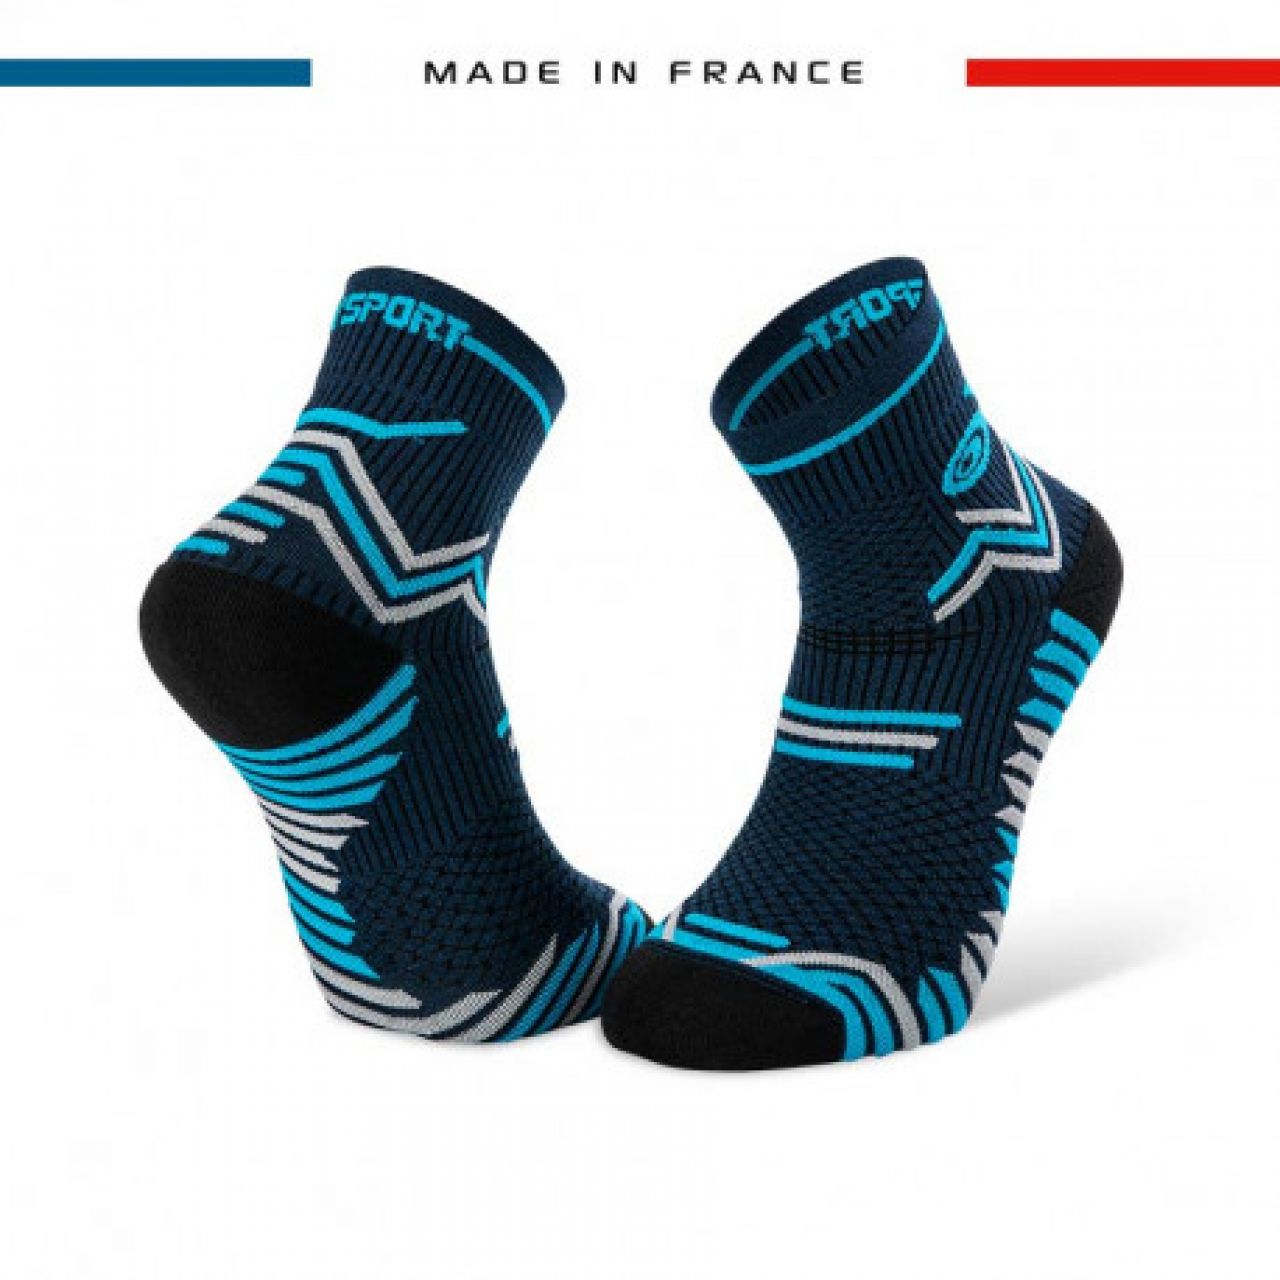 BV SPORT CHAUSSETTES ULTRA TRAIL GRISES ET BLEUES Made in France